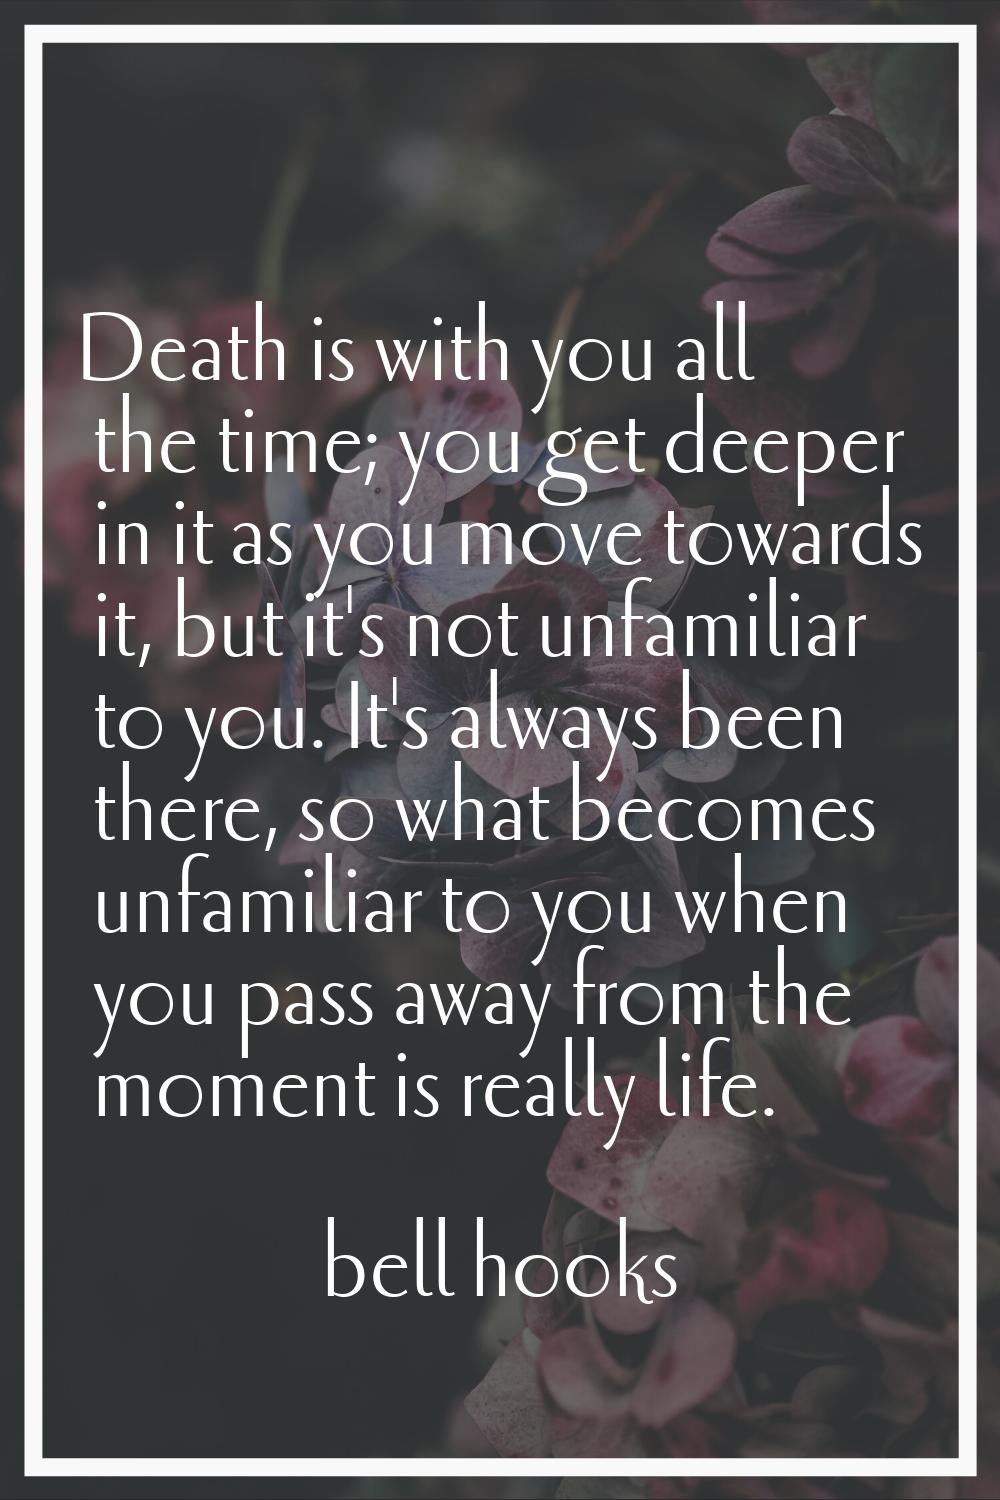 Death is with you all the time; you get deeper in it as you move towards it, but it's not unfamilia